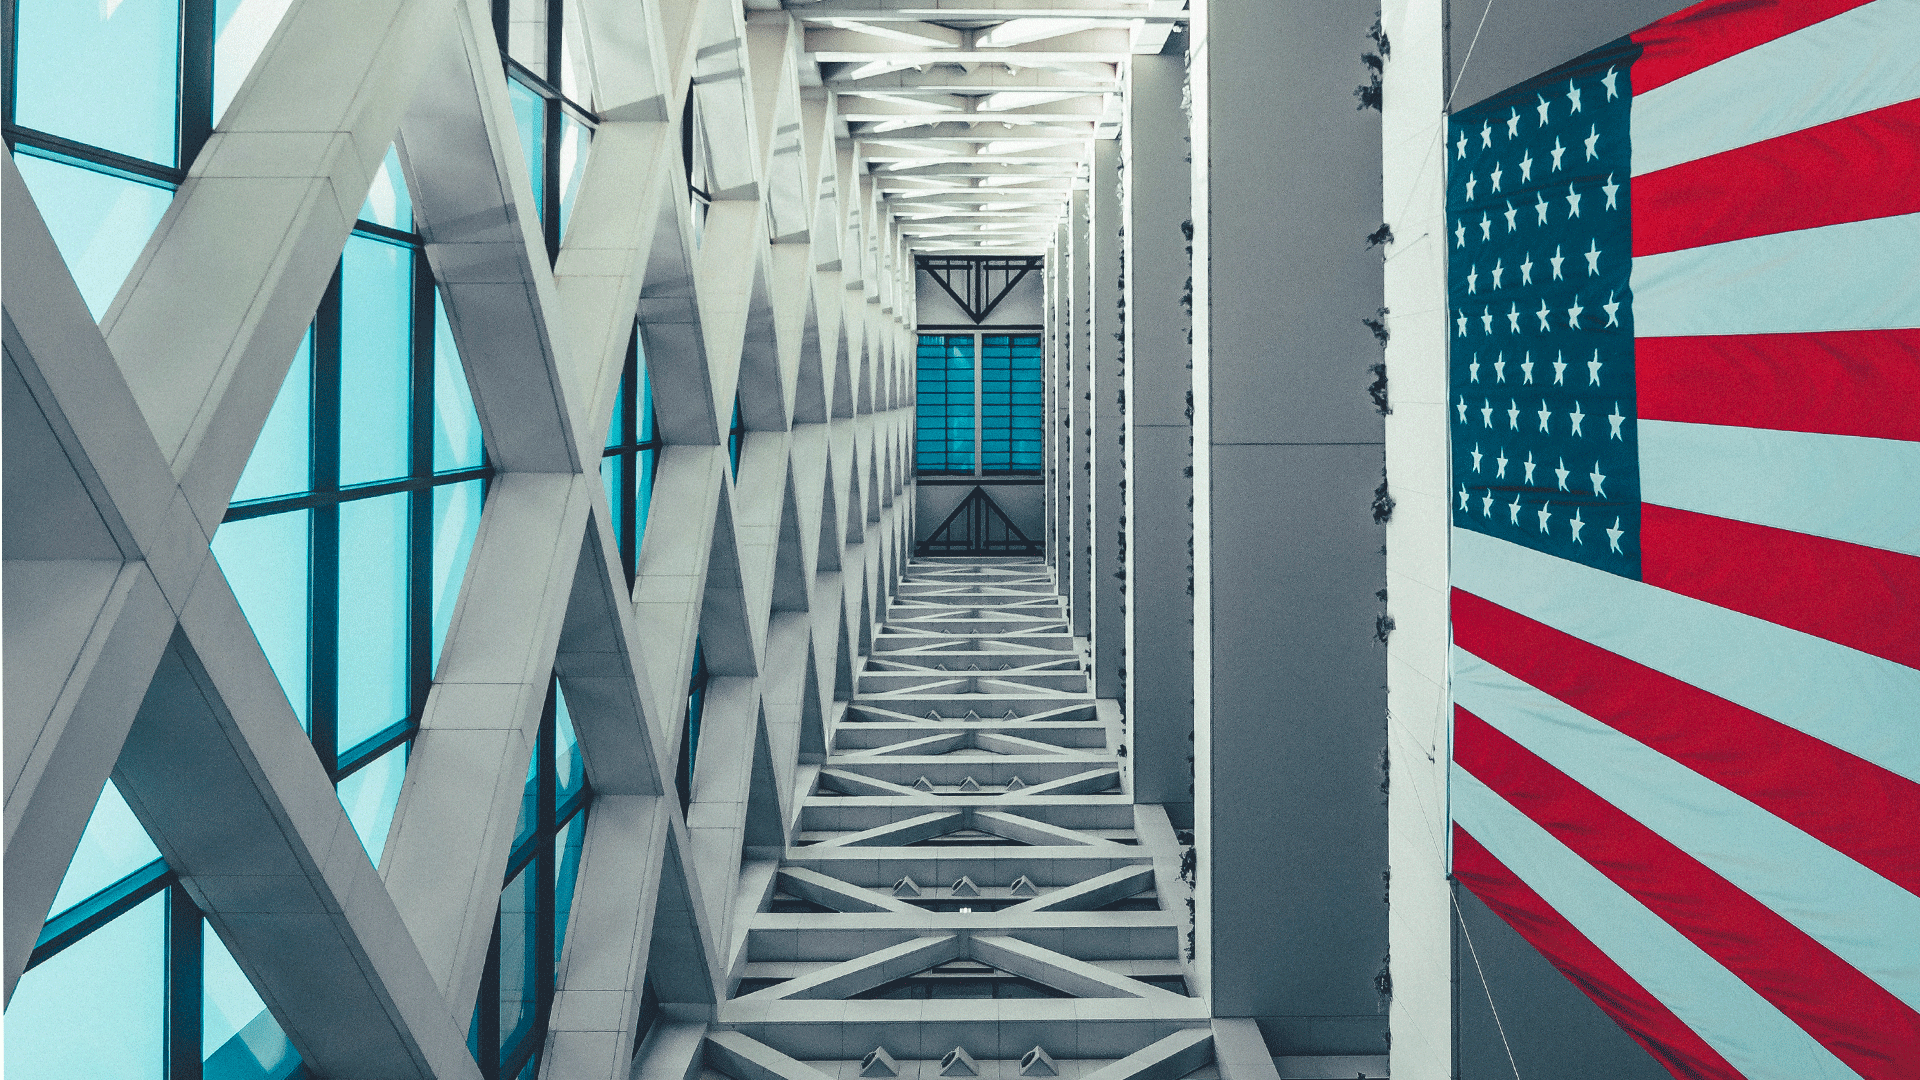 Lobby view with US flag